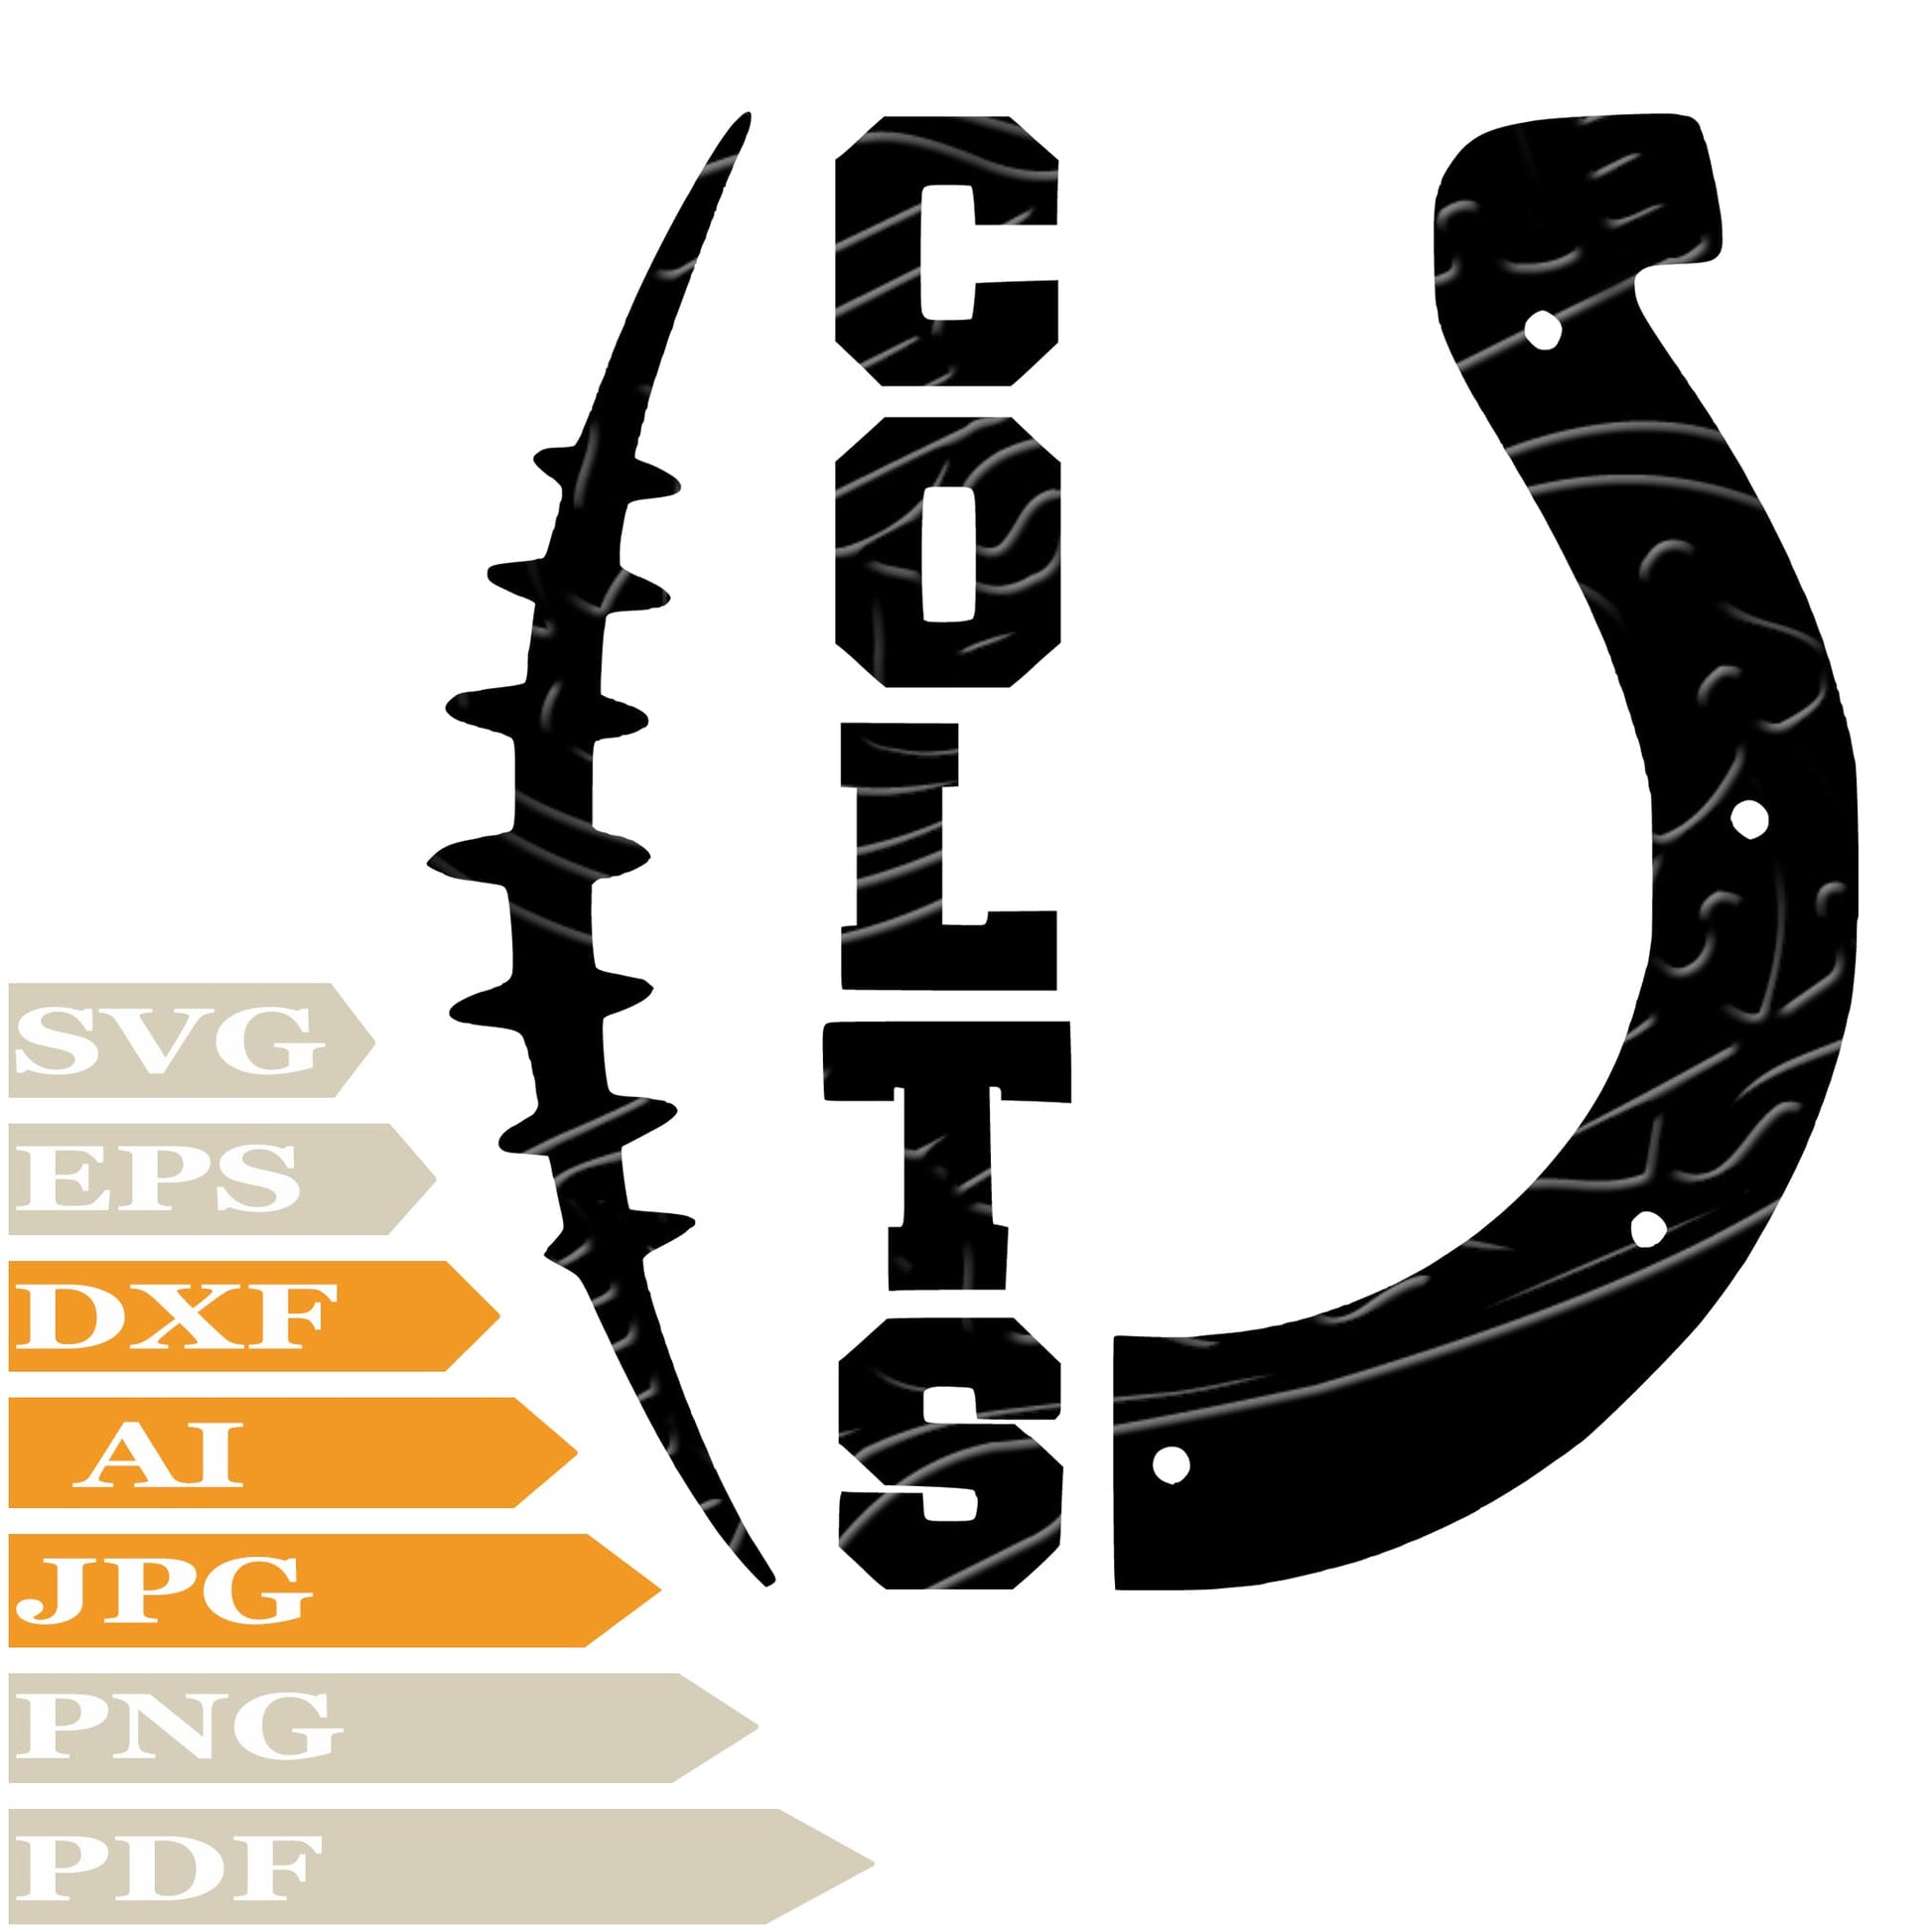 Colts Football, Indianapolis Colts Logo Svg File, Image Cut, Png, For Tattoo, Silhouette, Digital Vector Download, Cut File, Clipart, For Cricut